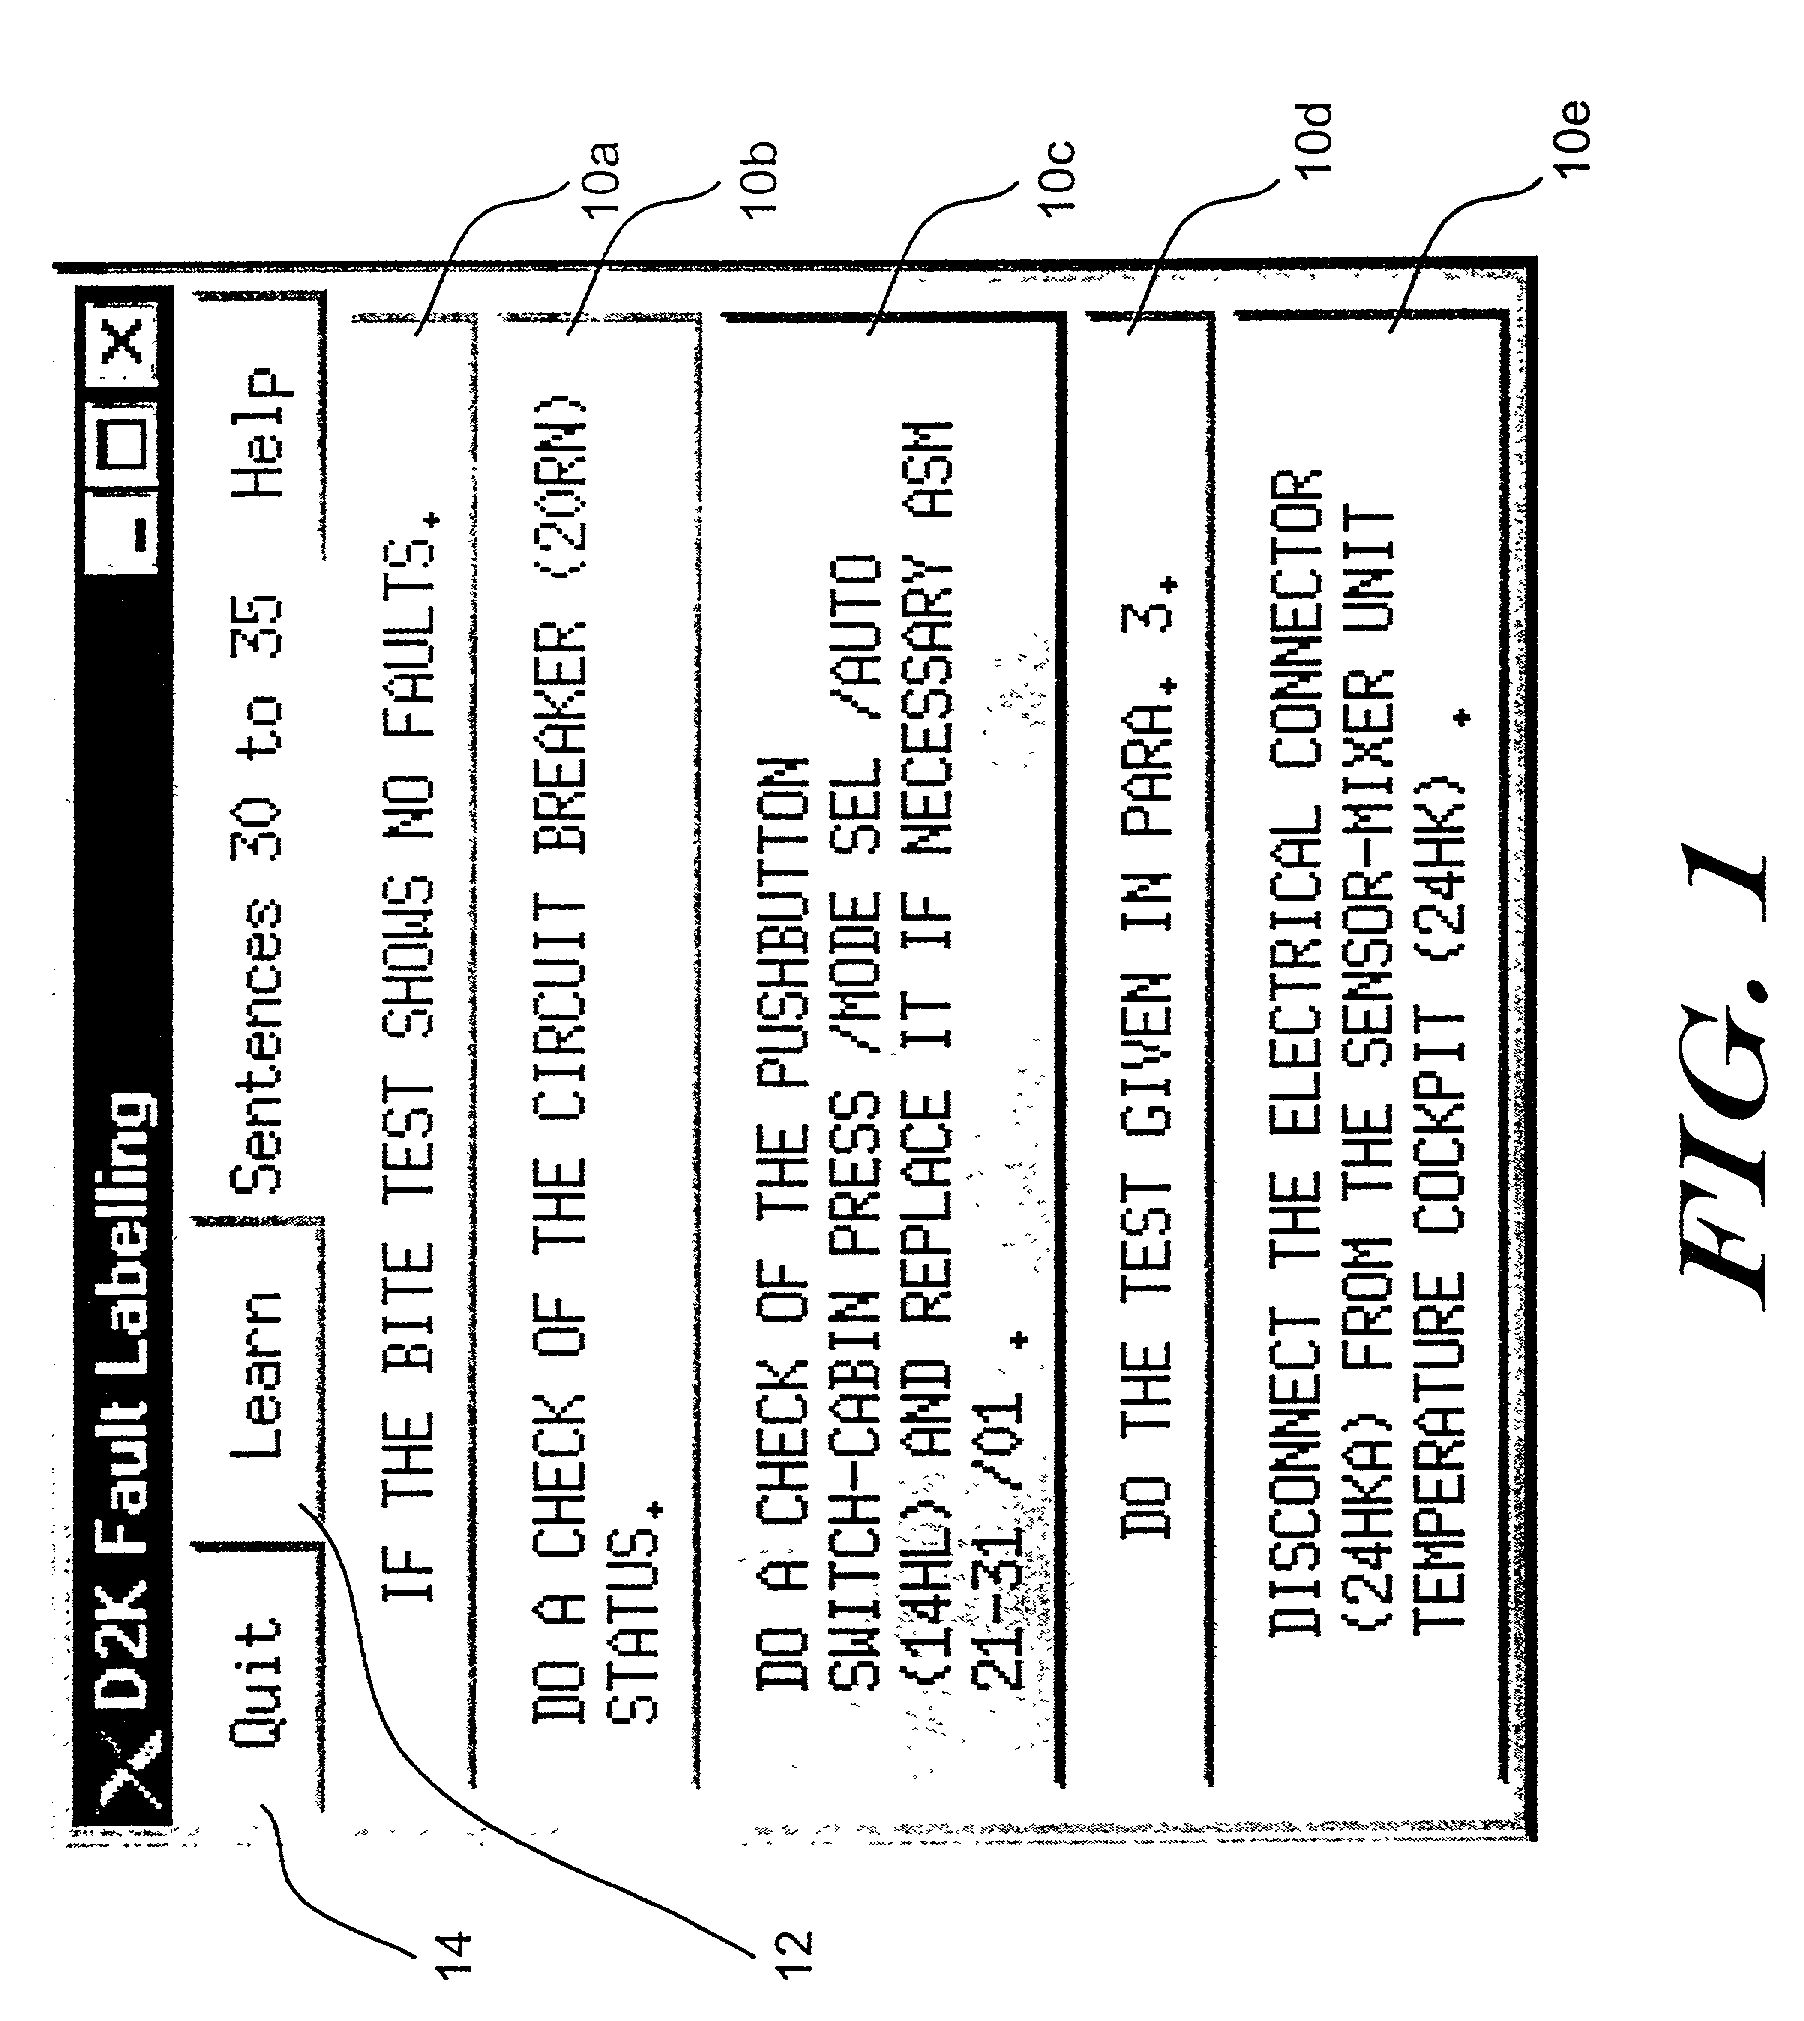 Method and apparatus for determining a measure of similarity between natural language sentences